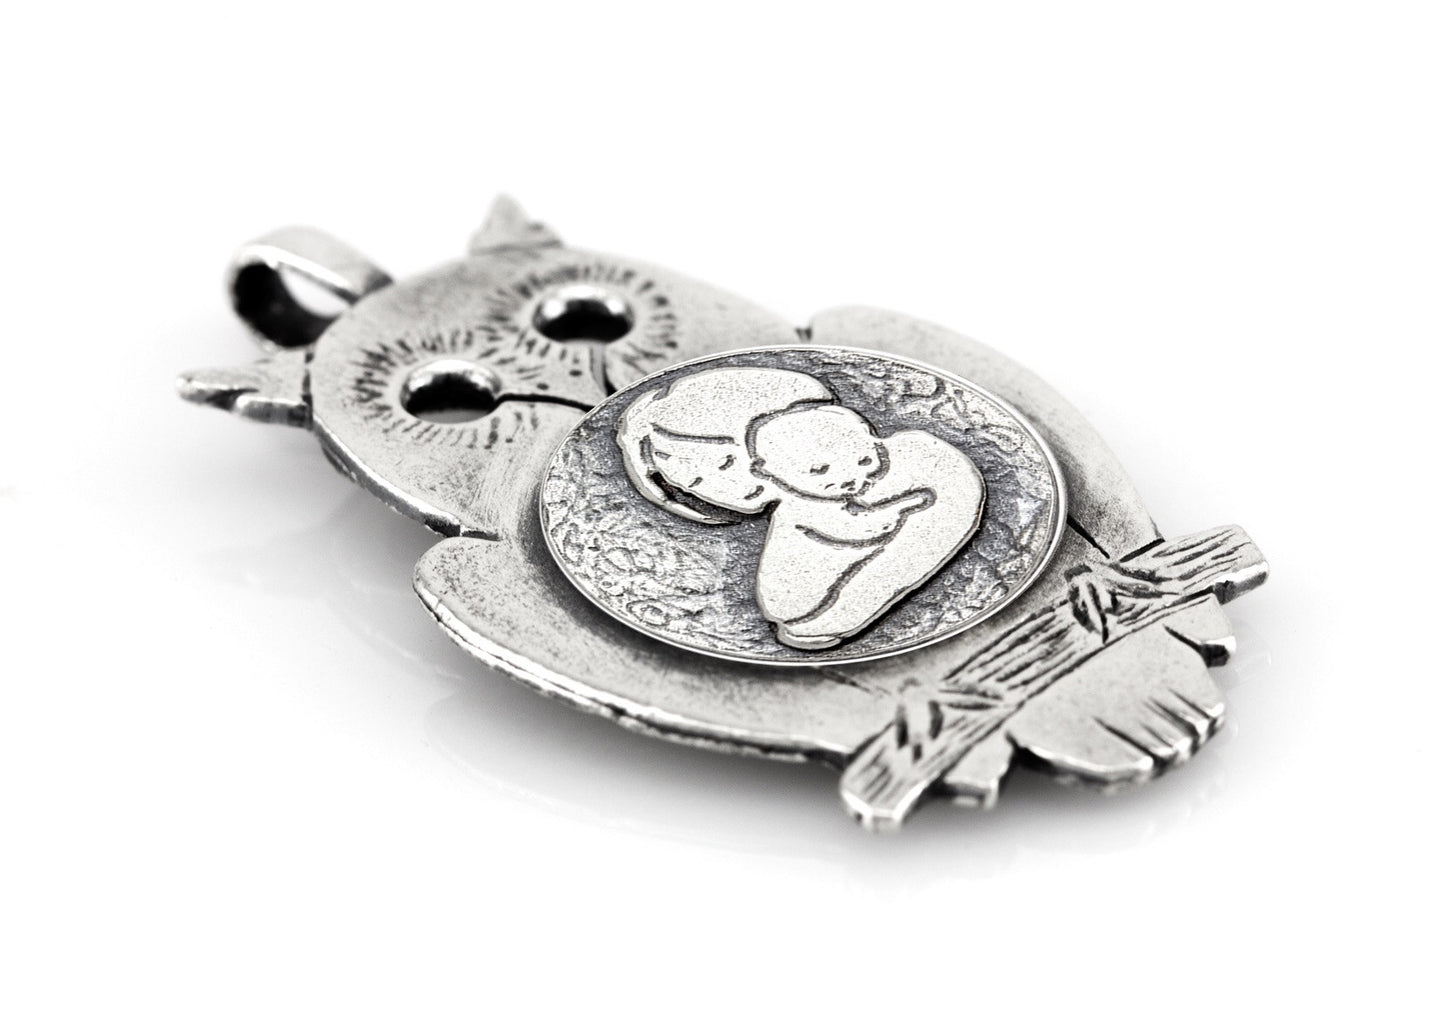 Silver Owl Pendant with Mother and Child